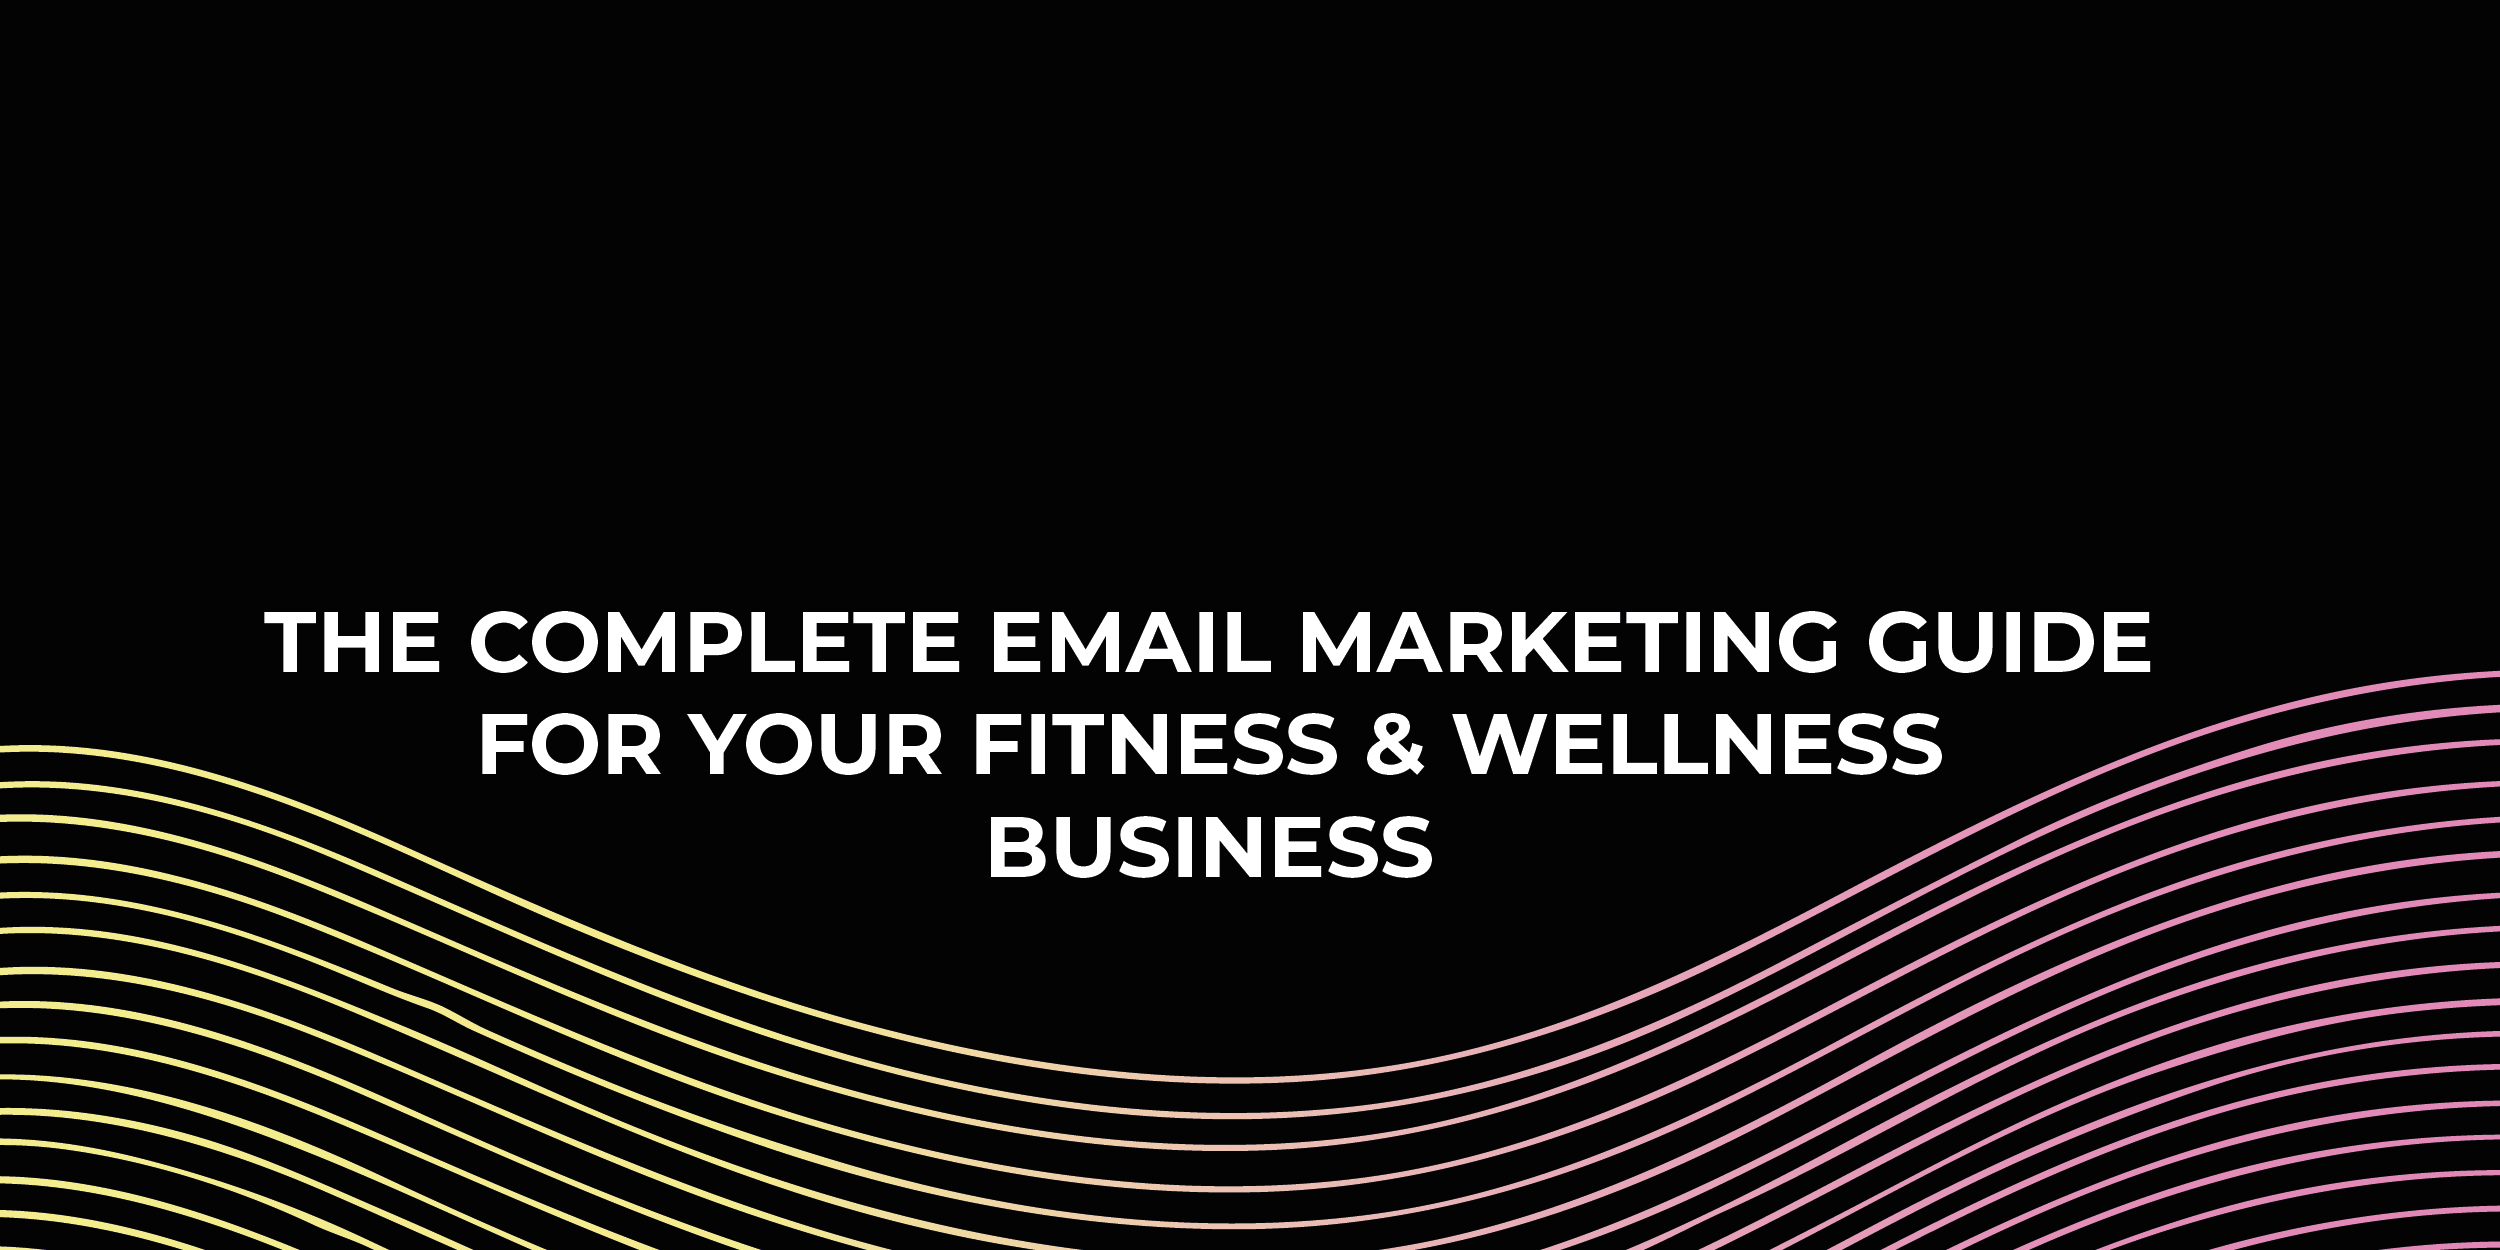 The Complete Email Marketing Guide For Your Fitness & Wellness Business